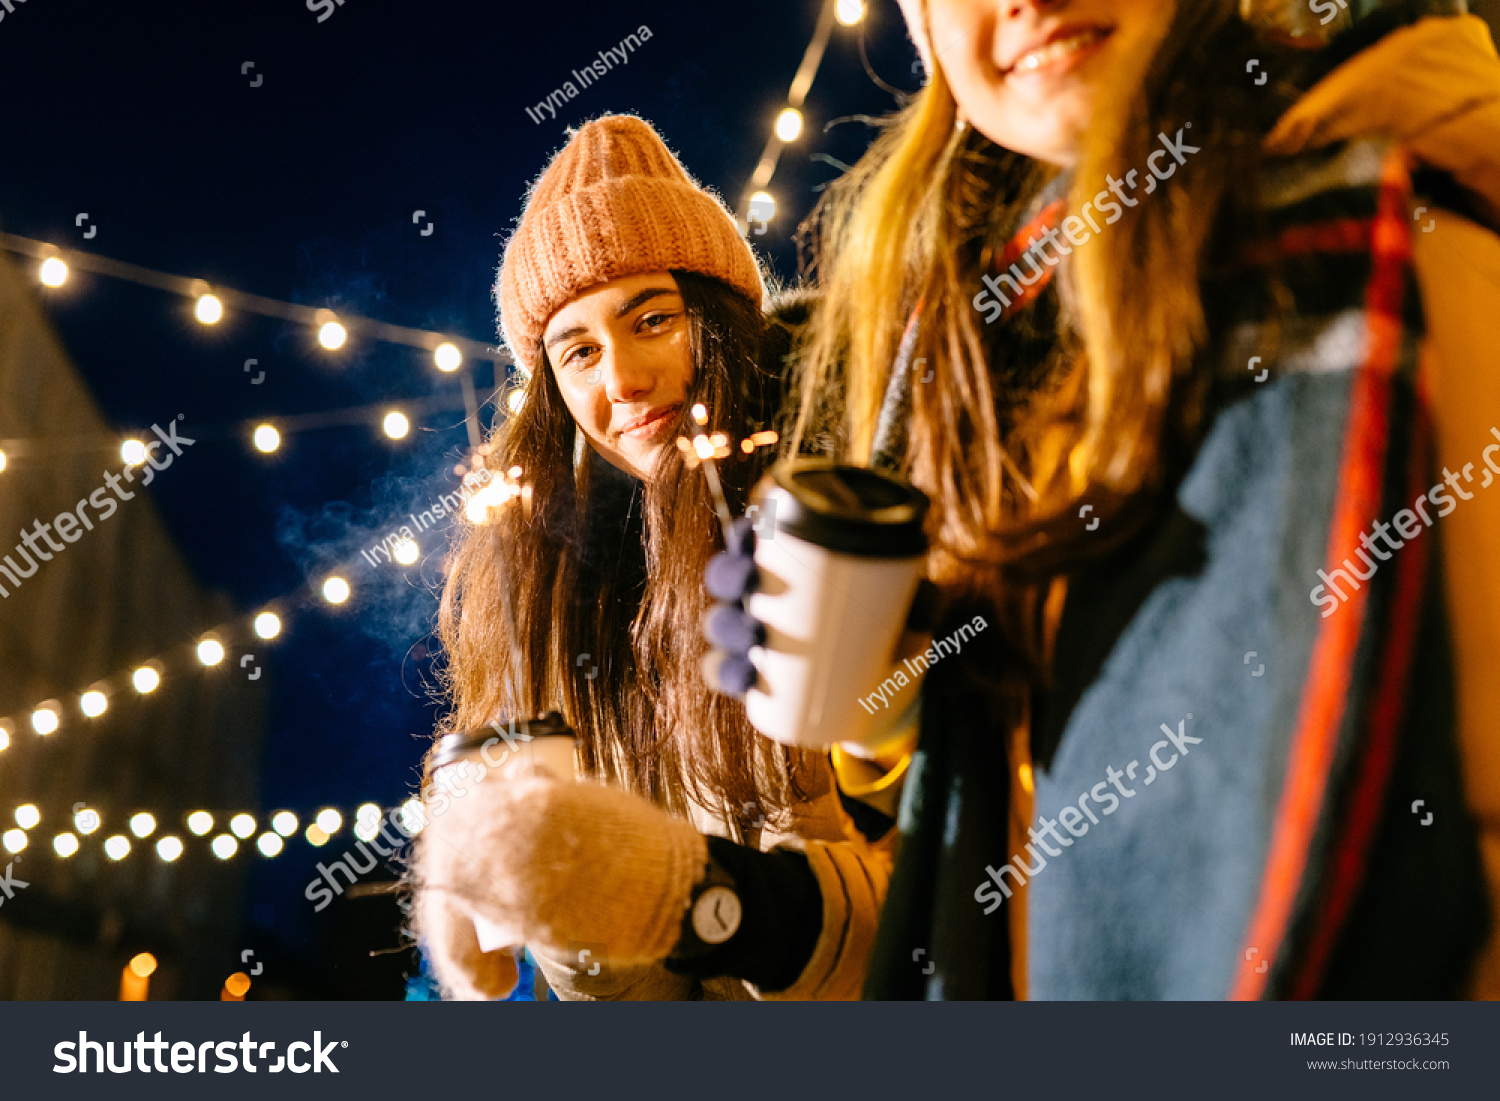 Amazing women friends in gray coat and pink hat walking down the street with sparkler. Adorable females students in winter outfit spending time outdoor and looking at Bengal light with smile. #1912936345